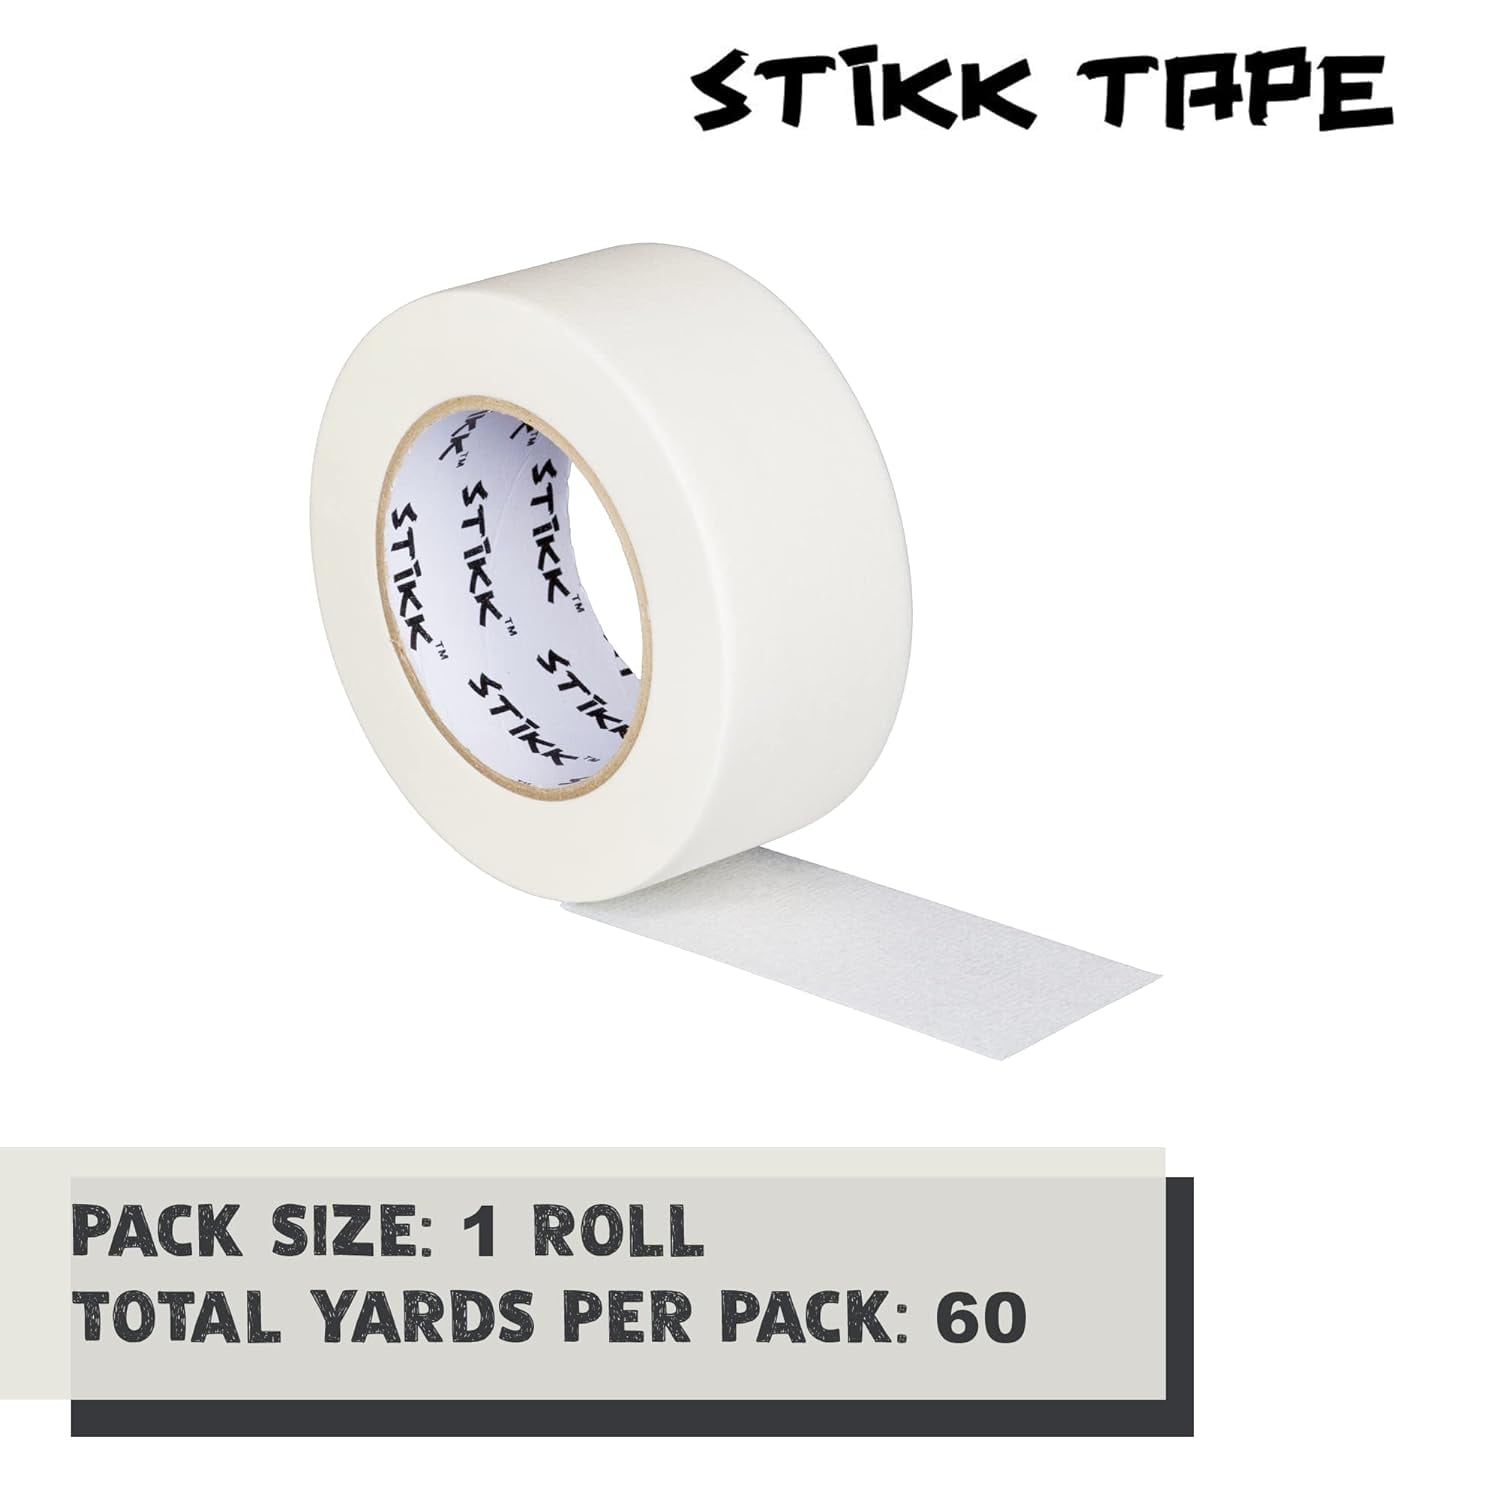 FKEYTO Masking Tape 2 Rolls - 1 inch x 55yds. Beige White Painter's Tape  for Safe Wall Painting,Office,Labeling, Edge Finishing